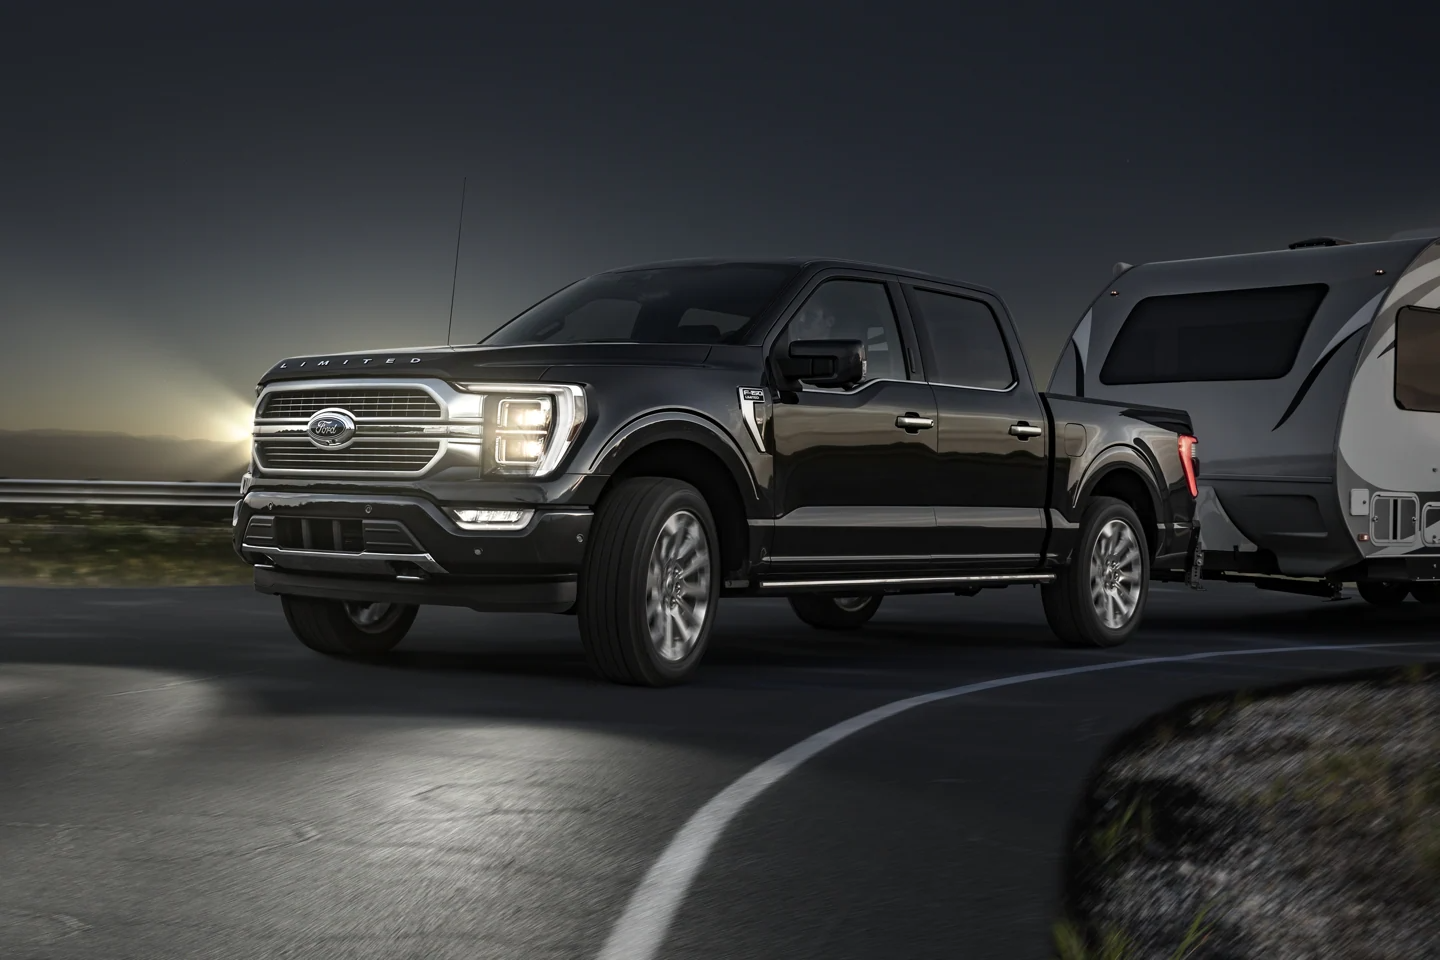 Trim Levels of the 2023 Ford F-150 near Seattle